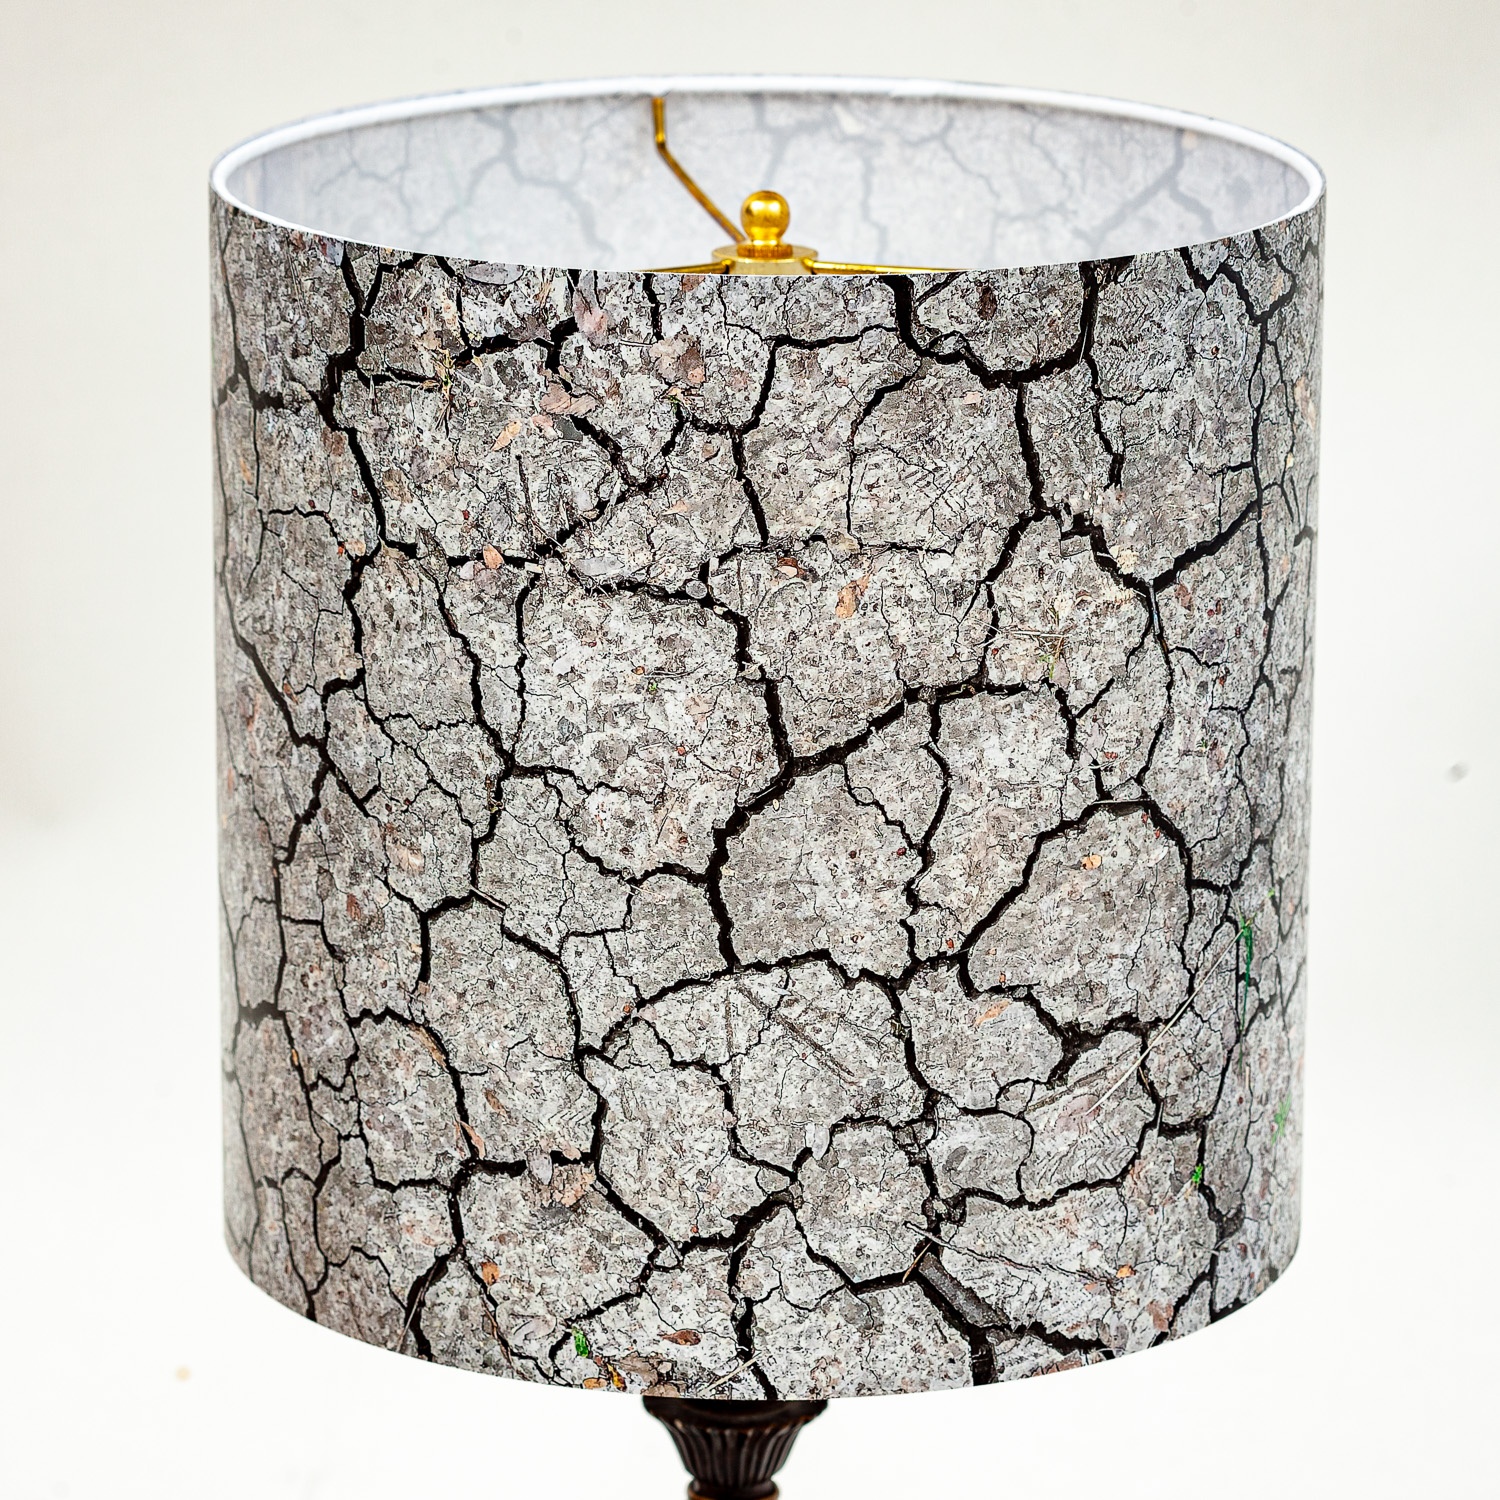 144: Cracked mud, Cedar Hill State Park, Texas -- Photo on Lamp shade by David Elmore